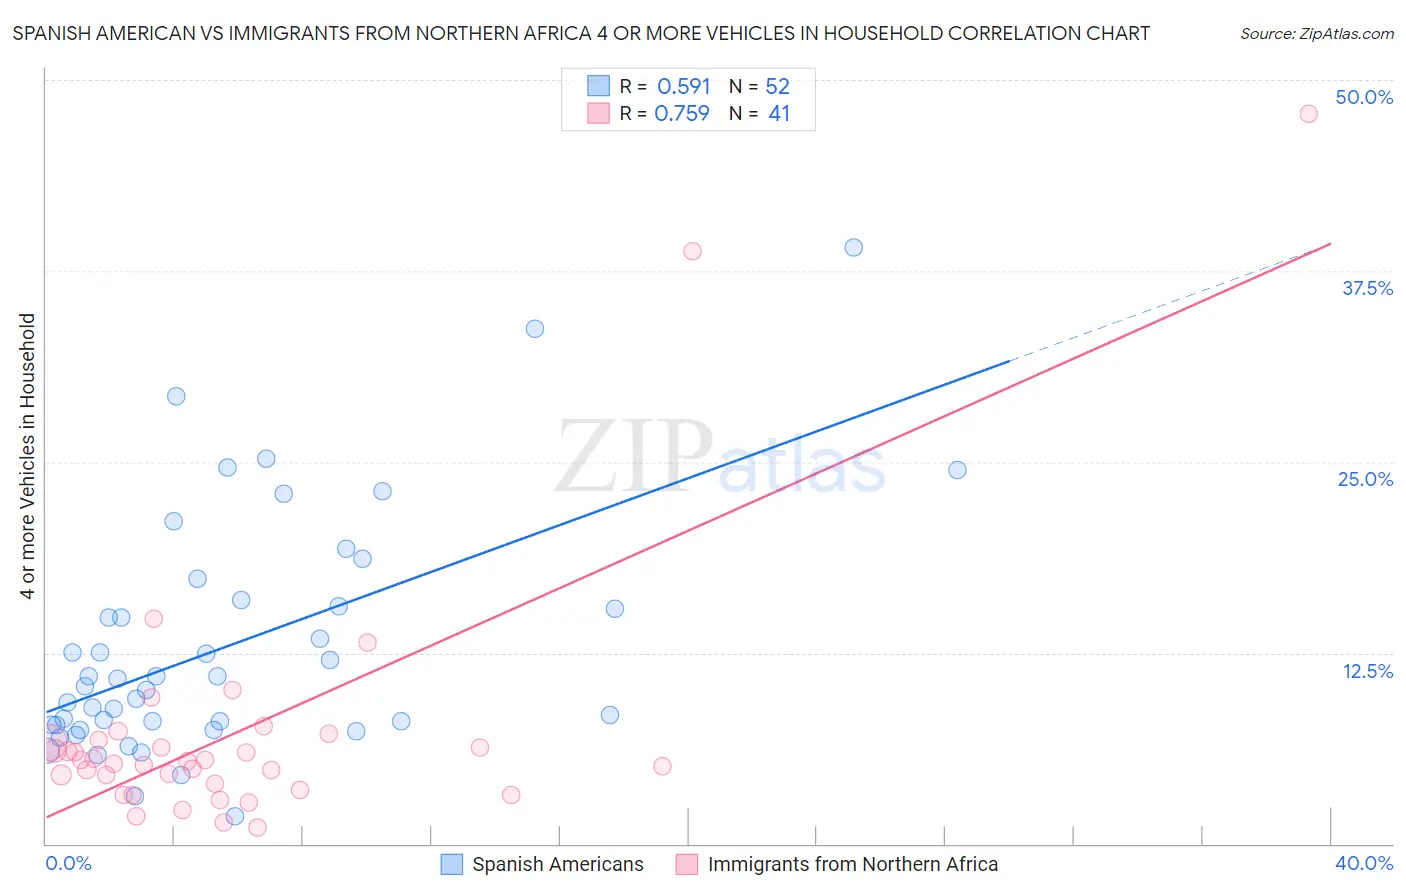 Spanish American vs Immigrants from Northern Africa 4 or more Vehicles in Household